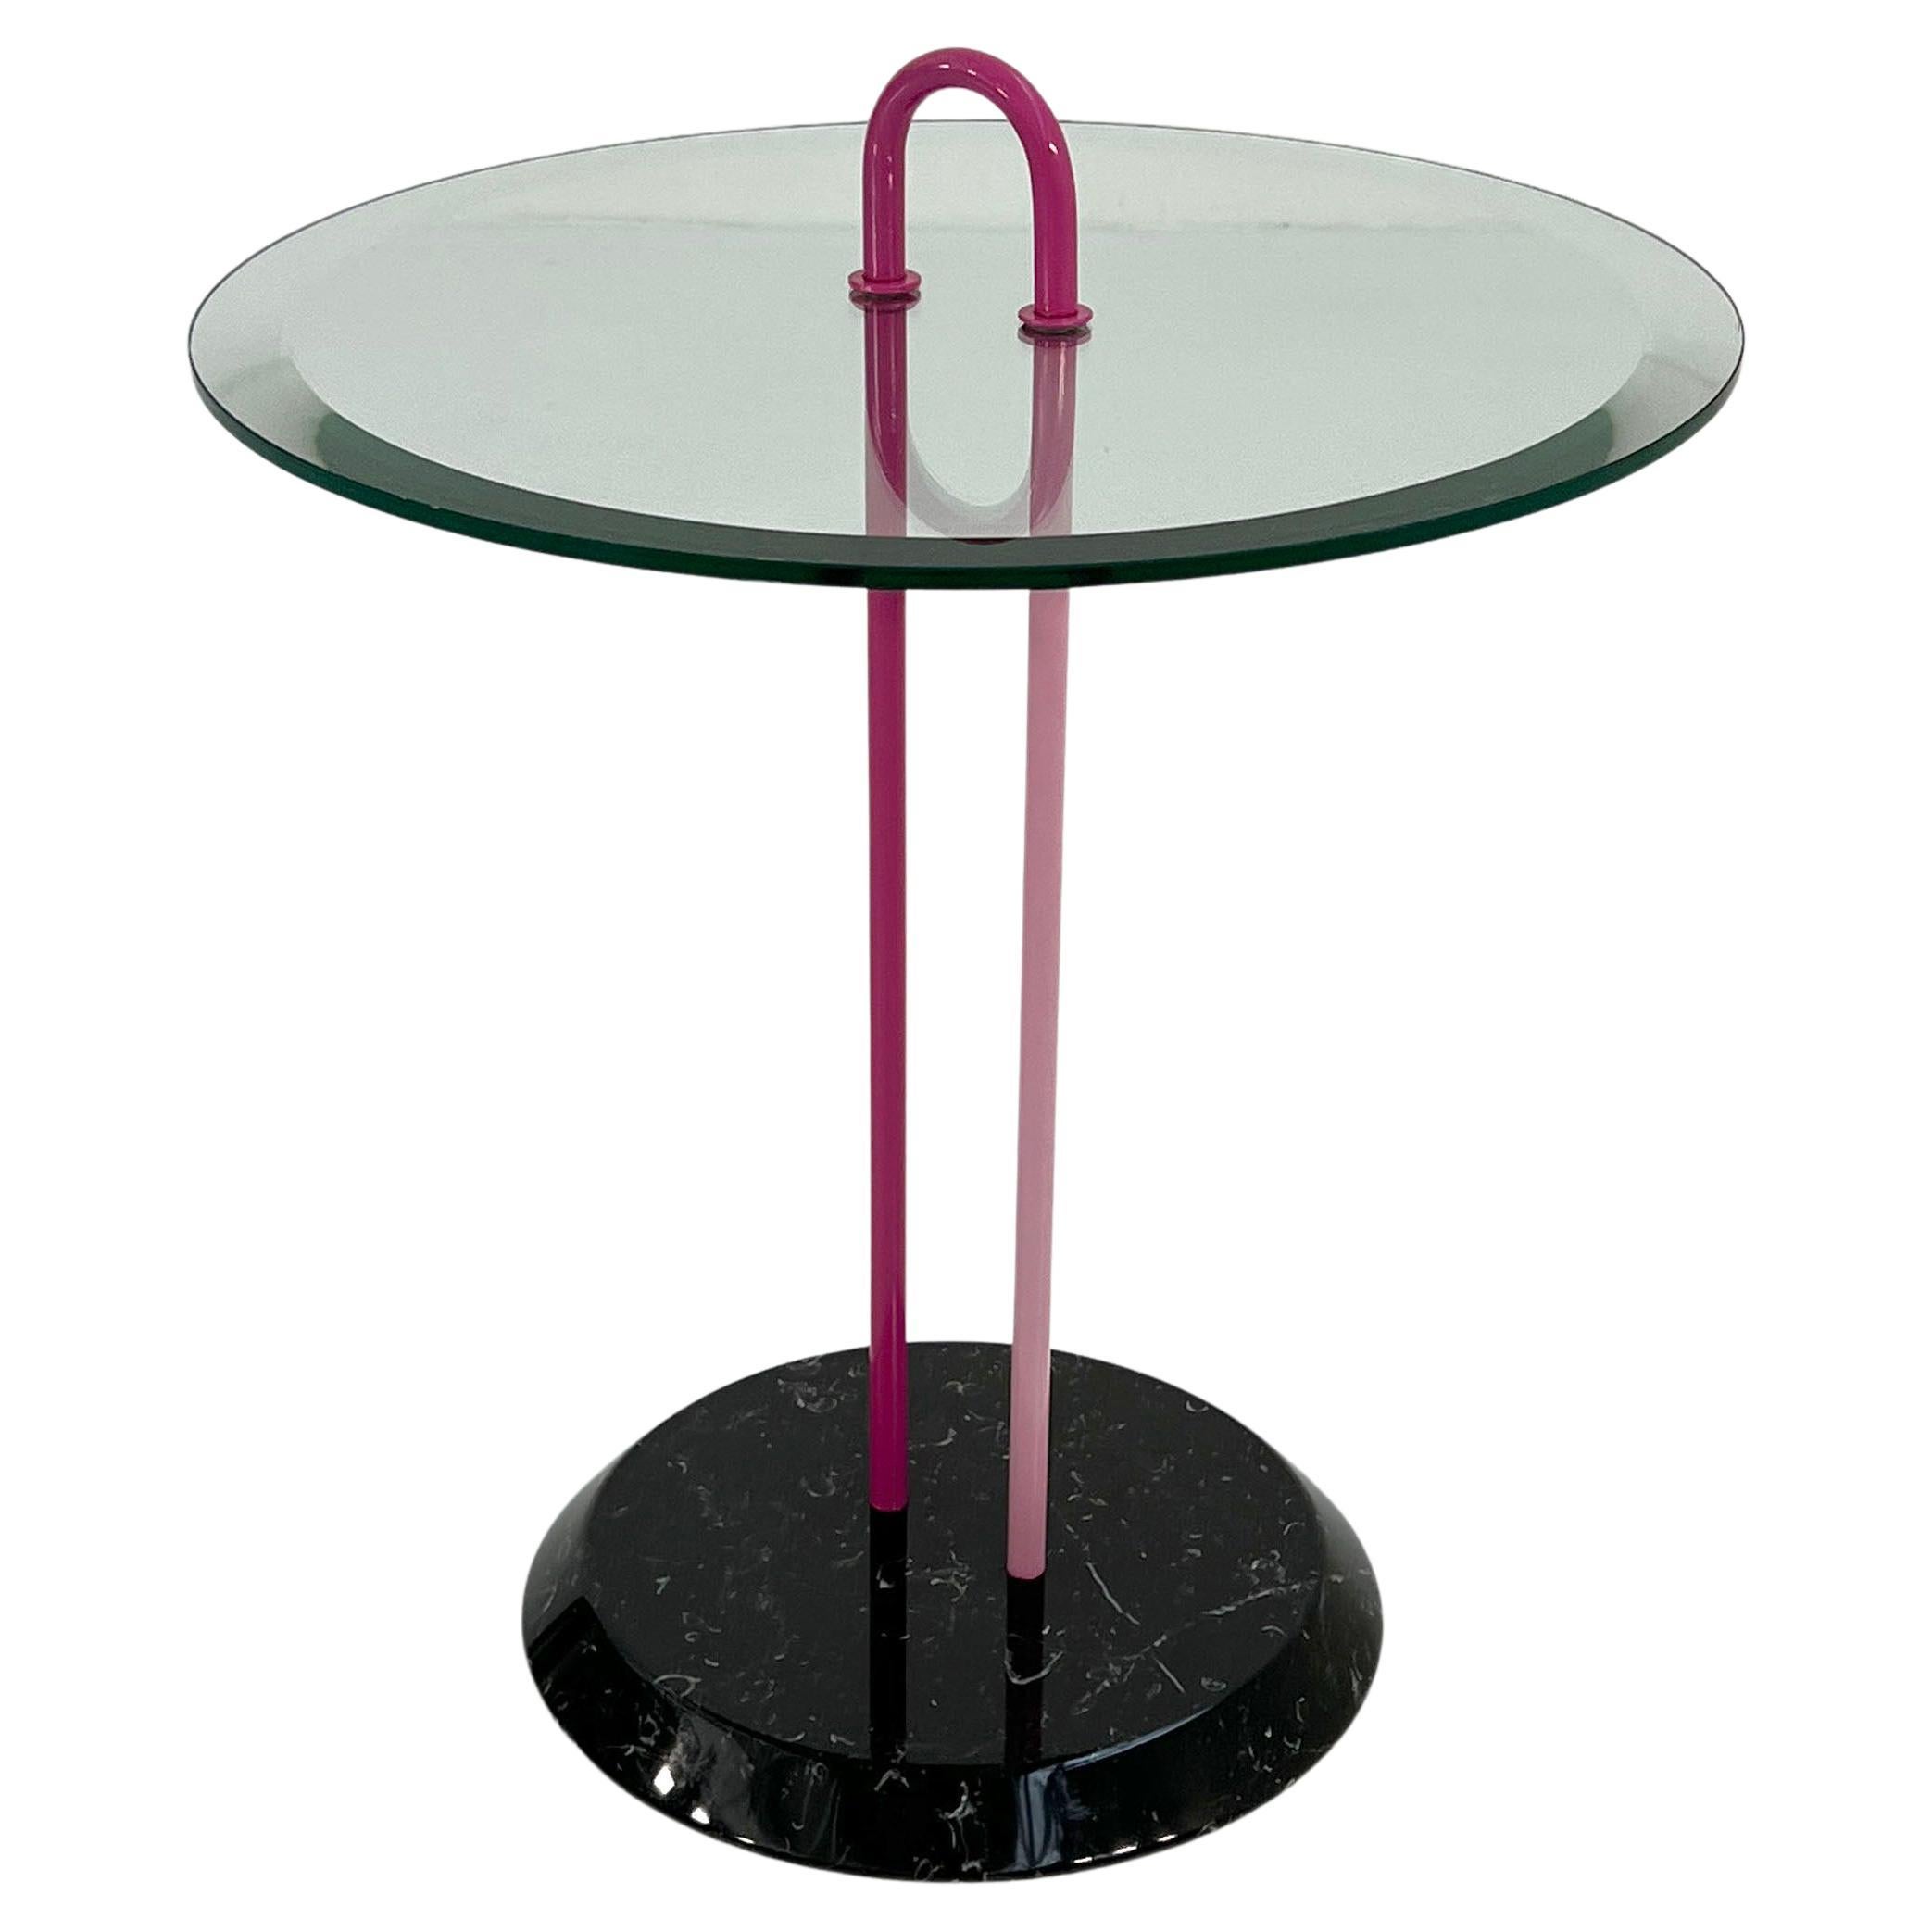 Pink Glass and Marble Side Table by Vico Magistretti for Cattelan Italy